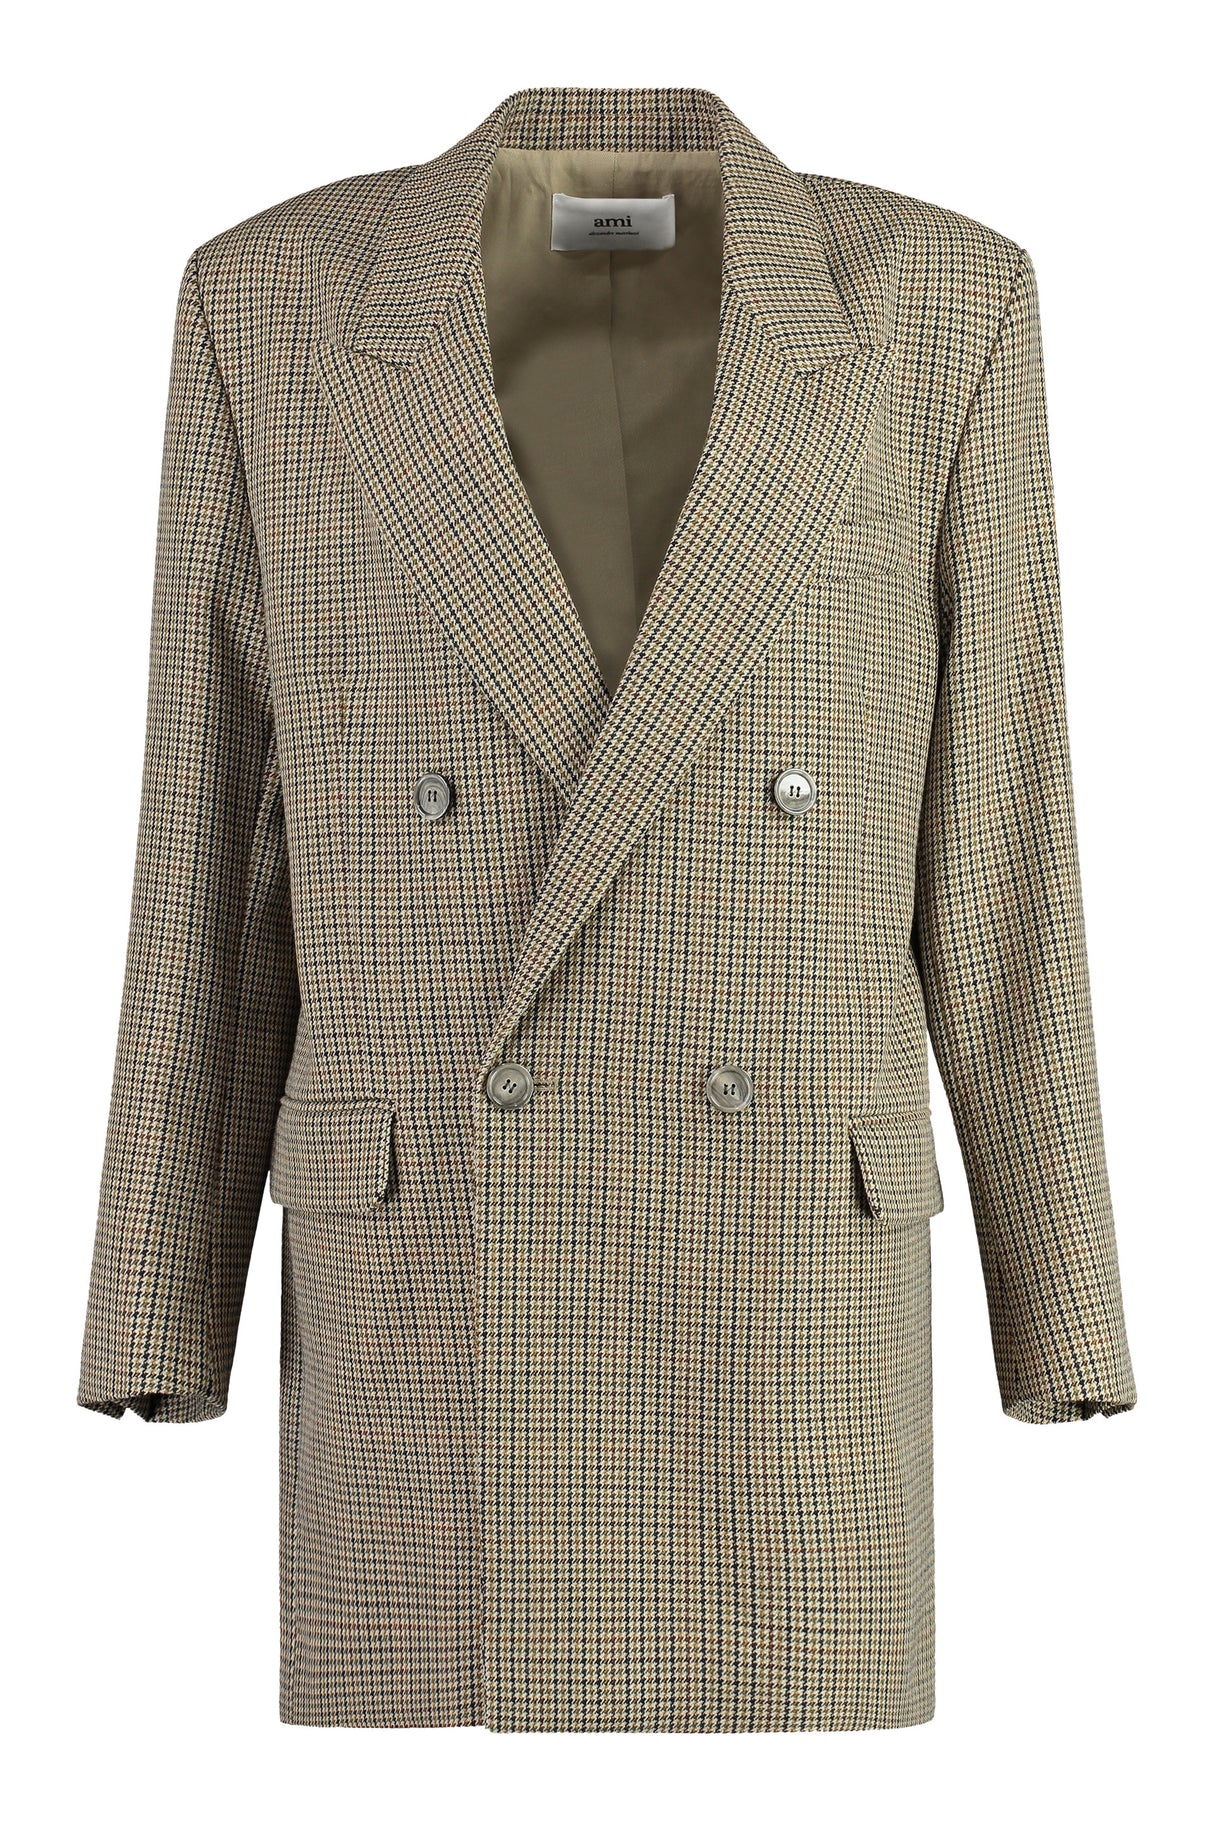 AMI PARIS Double-Breasted Houndstooth Blazer for Women - FW23